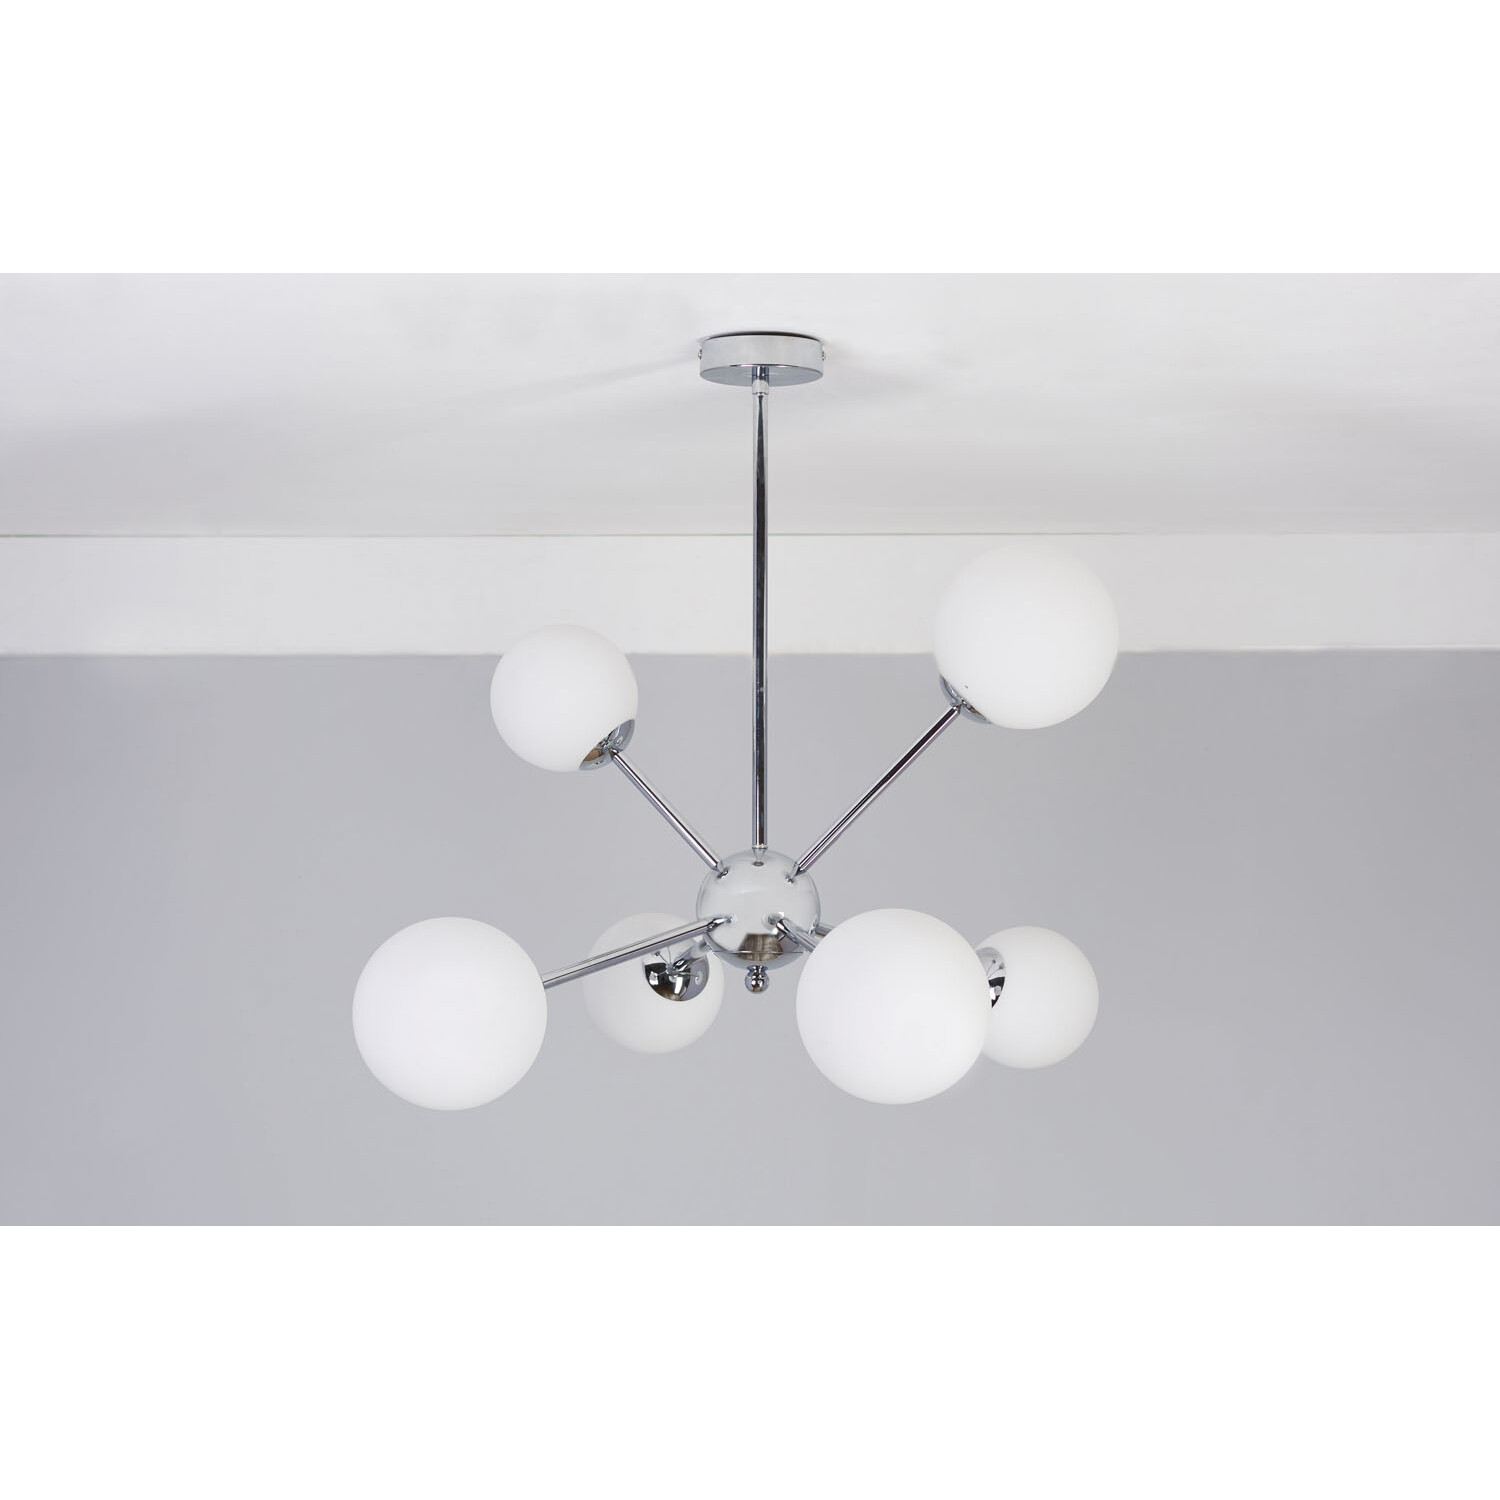 Astrid Silver 6 Light Ceiling Fitting Image 6